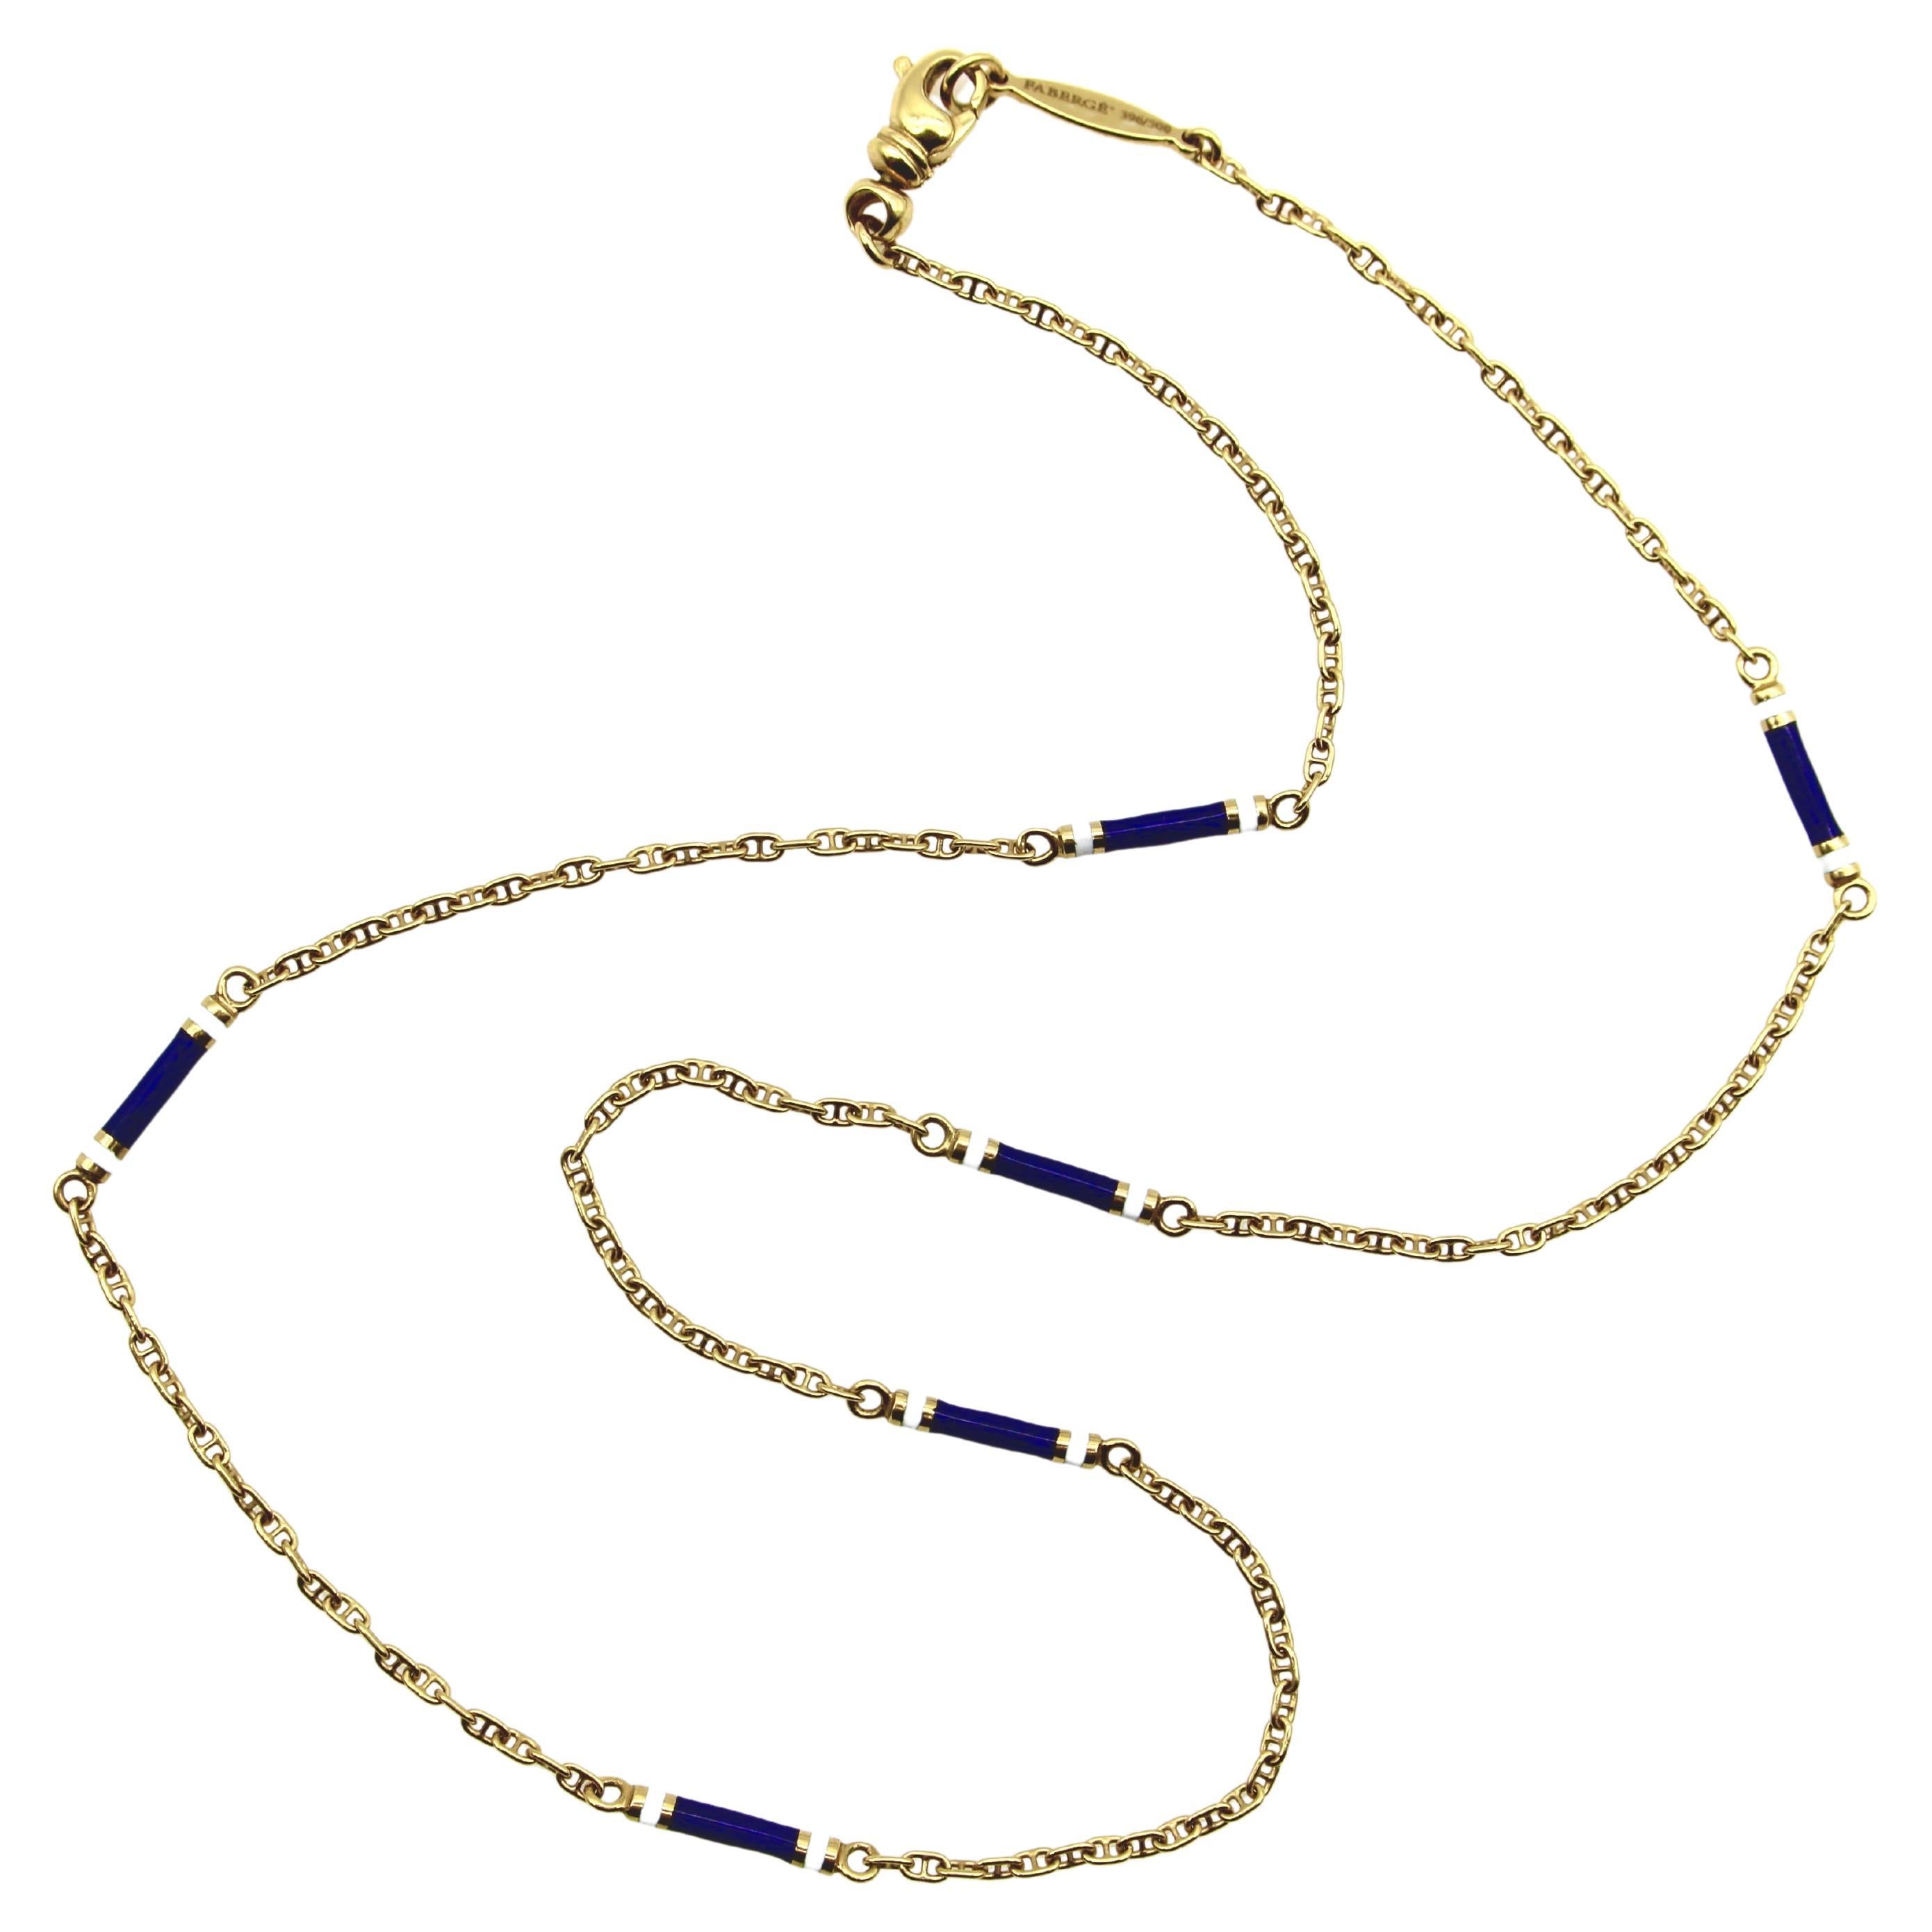 Fabergé 18K Gold Mariners Link Chain with Guilloché Enamel Stations 